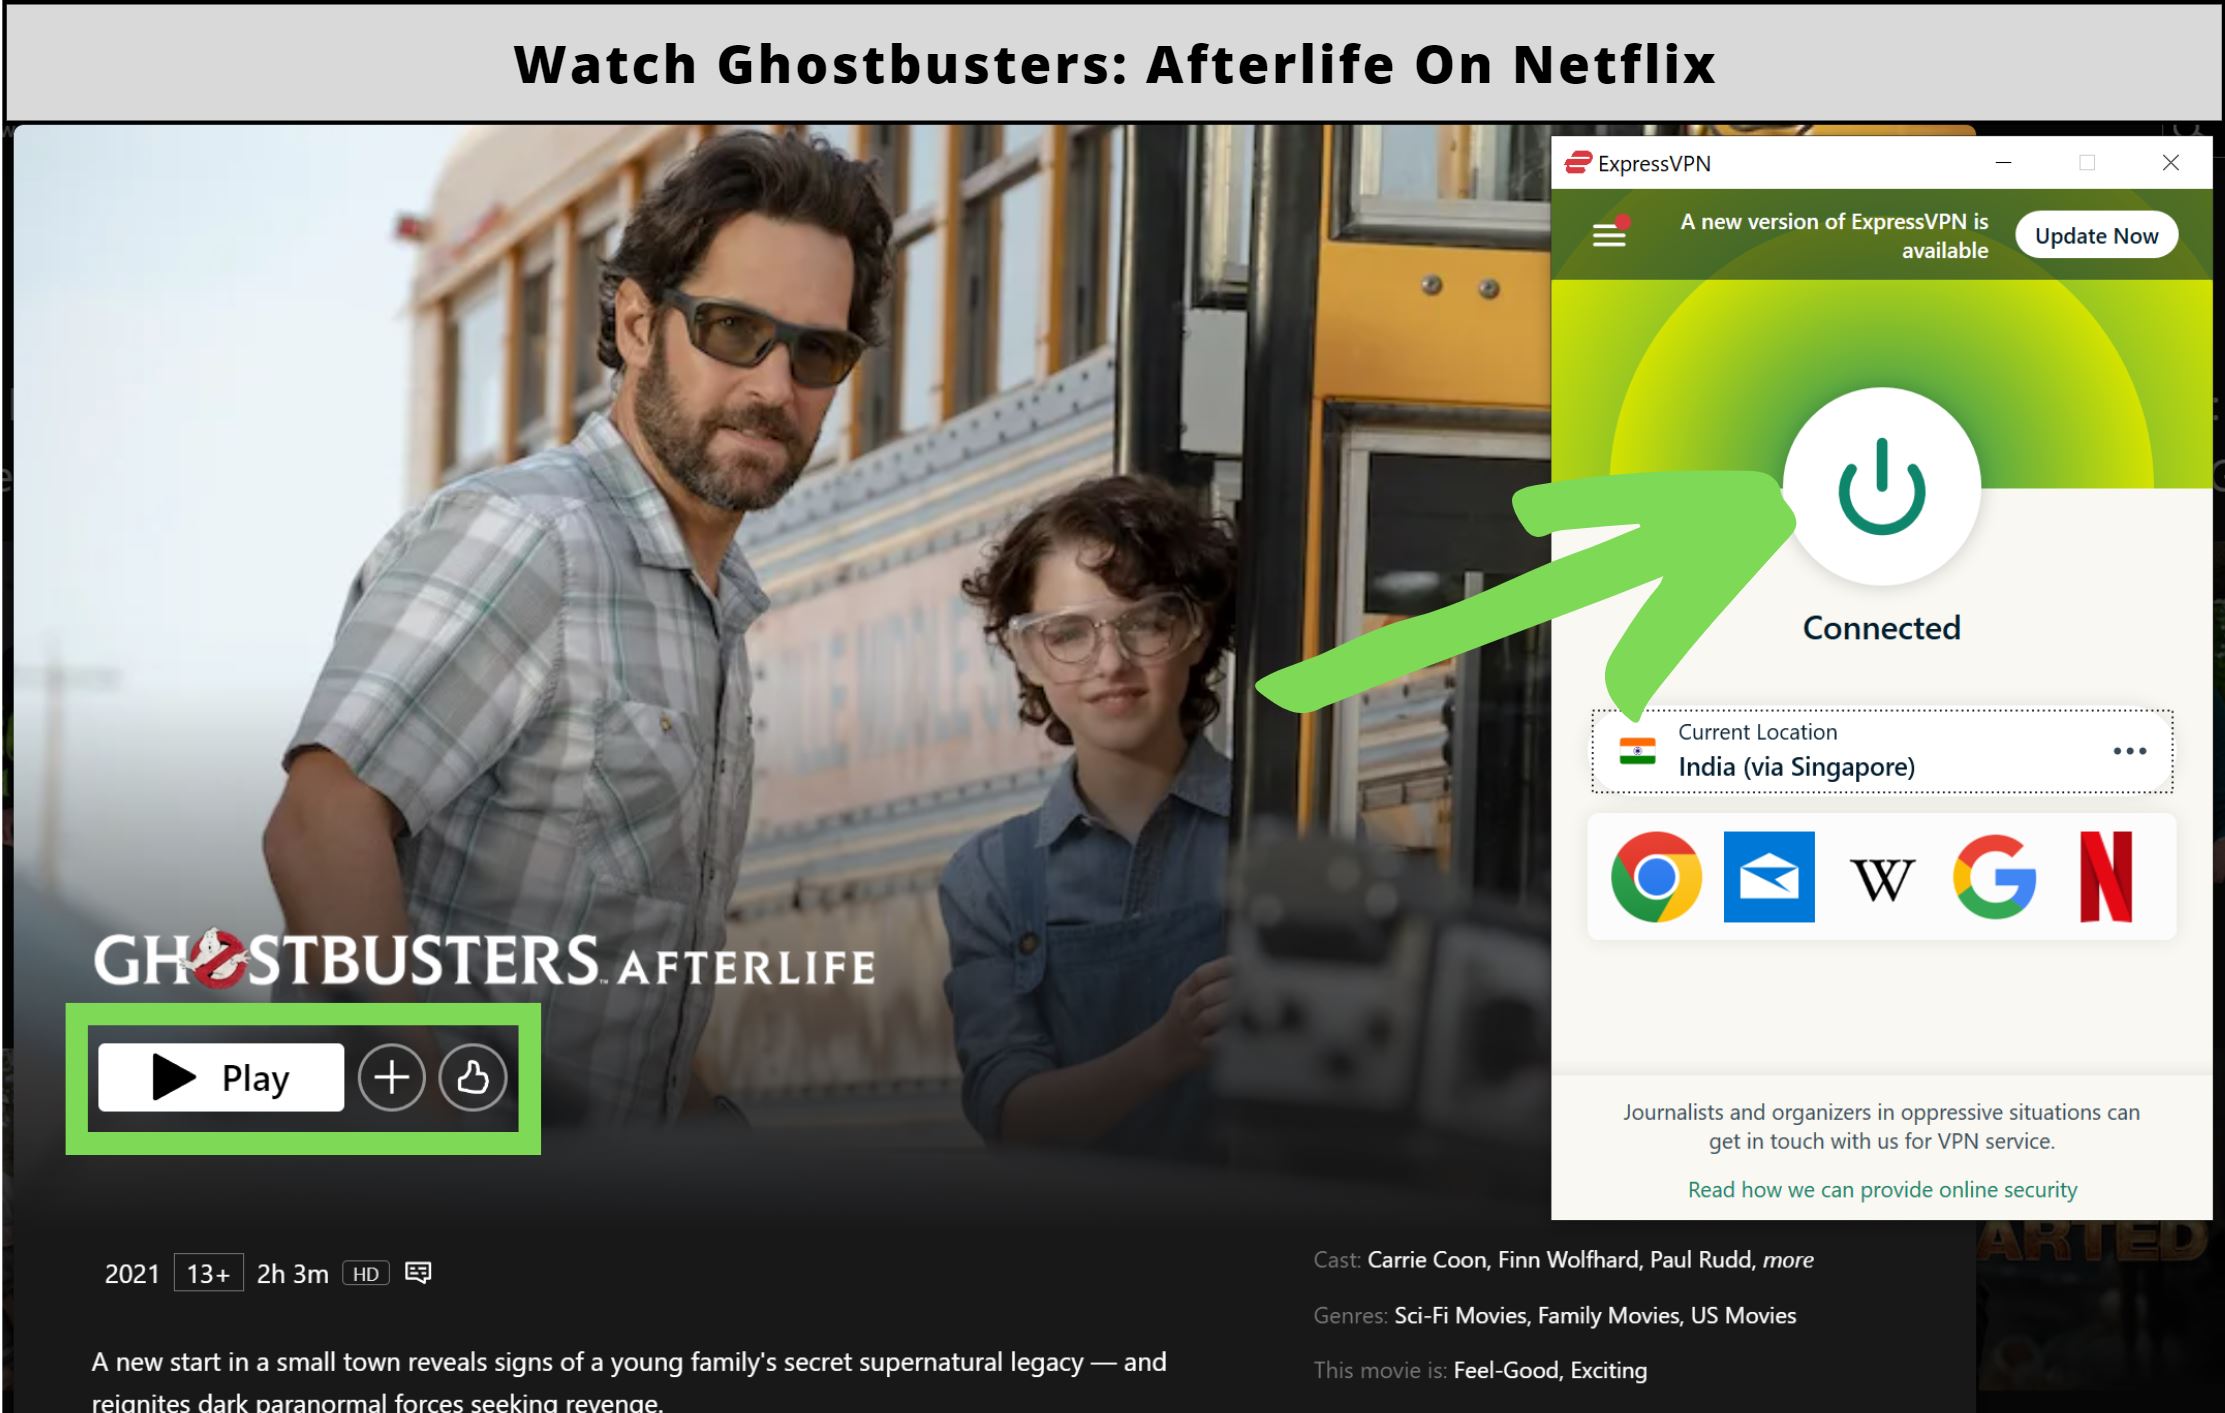 Is Ghostbusters: Afterlife on Netflix?